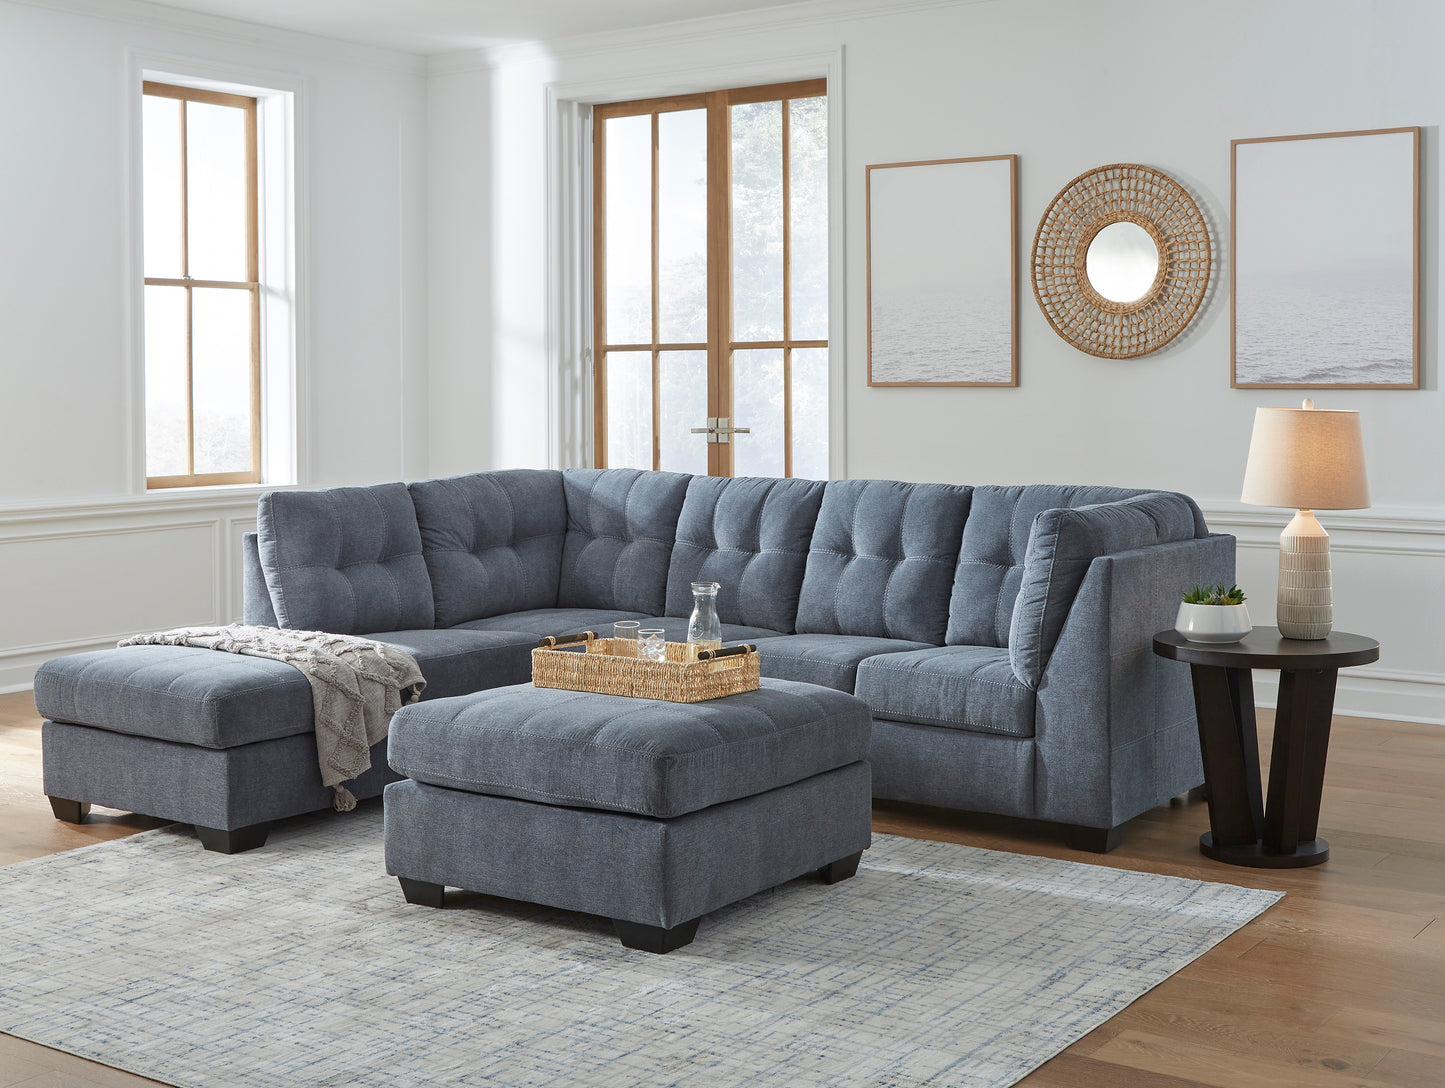 Marleton 2-Piece Sectional with Chaise - Denim